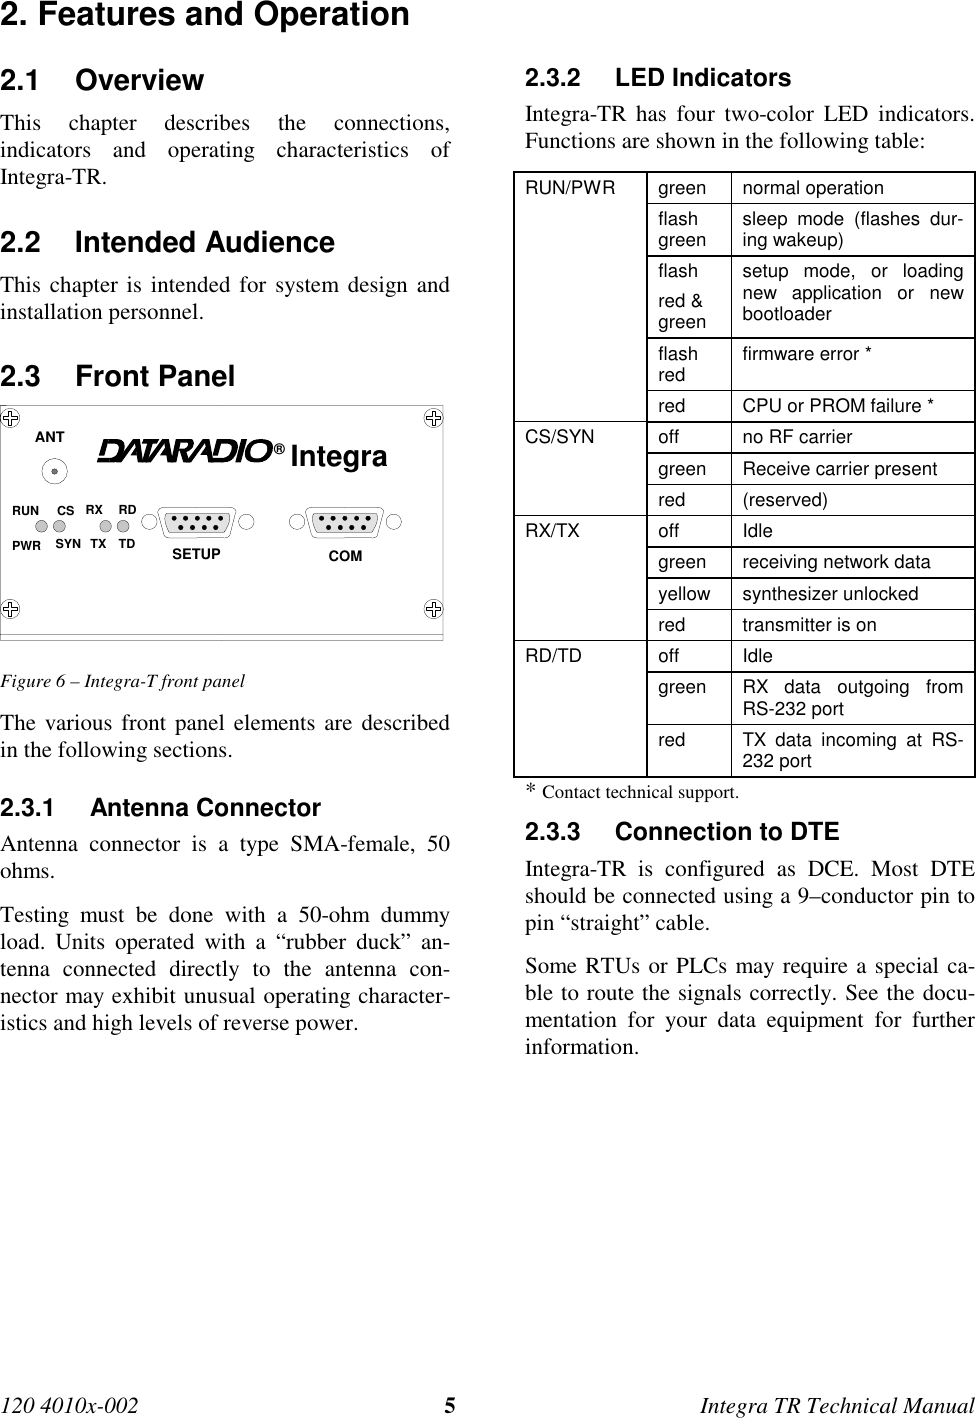 120 4010x-002 5Integra TR Technical Manual2. Features and Operation2.1 OverviewThis chapter describes the connections,indicators and operating characteristics ofIntegra-TR.2.2 Intended AudienceThis chapter is intended for system design andinstallation personnel.2.3 Front PanelIntegra®ANTSETUP COMRUN CS RX RDPWR SYN TX TDFigure 6 – Integra-T front panelThe various front panel elements are describedin the following sections.2.3.1 Antenna ConnectorAntenna connector is a type SMA-female, 50ohms.Testing must be done with a 50-ohm dummyload. Units operated with a “rubber duck” an-tenna connected directly to the antenna con-nector may exhibit unusual operating character-istics and high levels of reverse power.2.3.2 LED IndicatorsIntegra-TR has four two-color LED indicators.Functions are shown in the following table:RUN/PWR green normal operationflashgreen sleep mode (flashes dur-ing wakeup)flashred &amp;greensetup mode, or loadingnew application or newbootloaderflashred firmware error *red CPU or PROM failure *CS/SYN off no RF carriergreen Receive carrier presentred (reserved)RX/TX off Idlegreen receiving network datayellow synthesizer unlockedred transmitter is onRD/TD off Idlegreen RX data outgoing fromRS-232 portred TX data incoming at RS-232 port* Contact technical support.2.3.3  Connection to DTEIntegra-TR is configured as DCE. Most DTEshould be connected using a 9–conductor pin topin “straight” cable.Some RTUs or PLCs may require a special ca-ble to route the signals correctly. See the docu-mentation for your data equipment for furtherinformation.